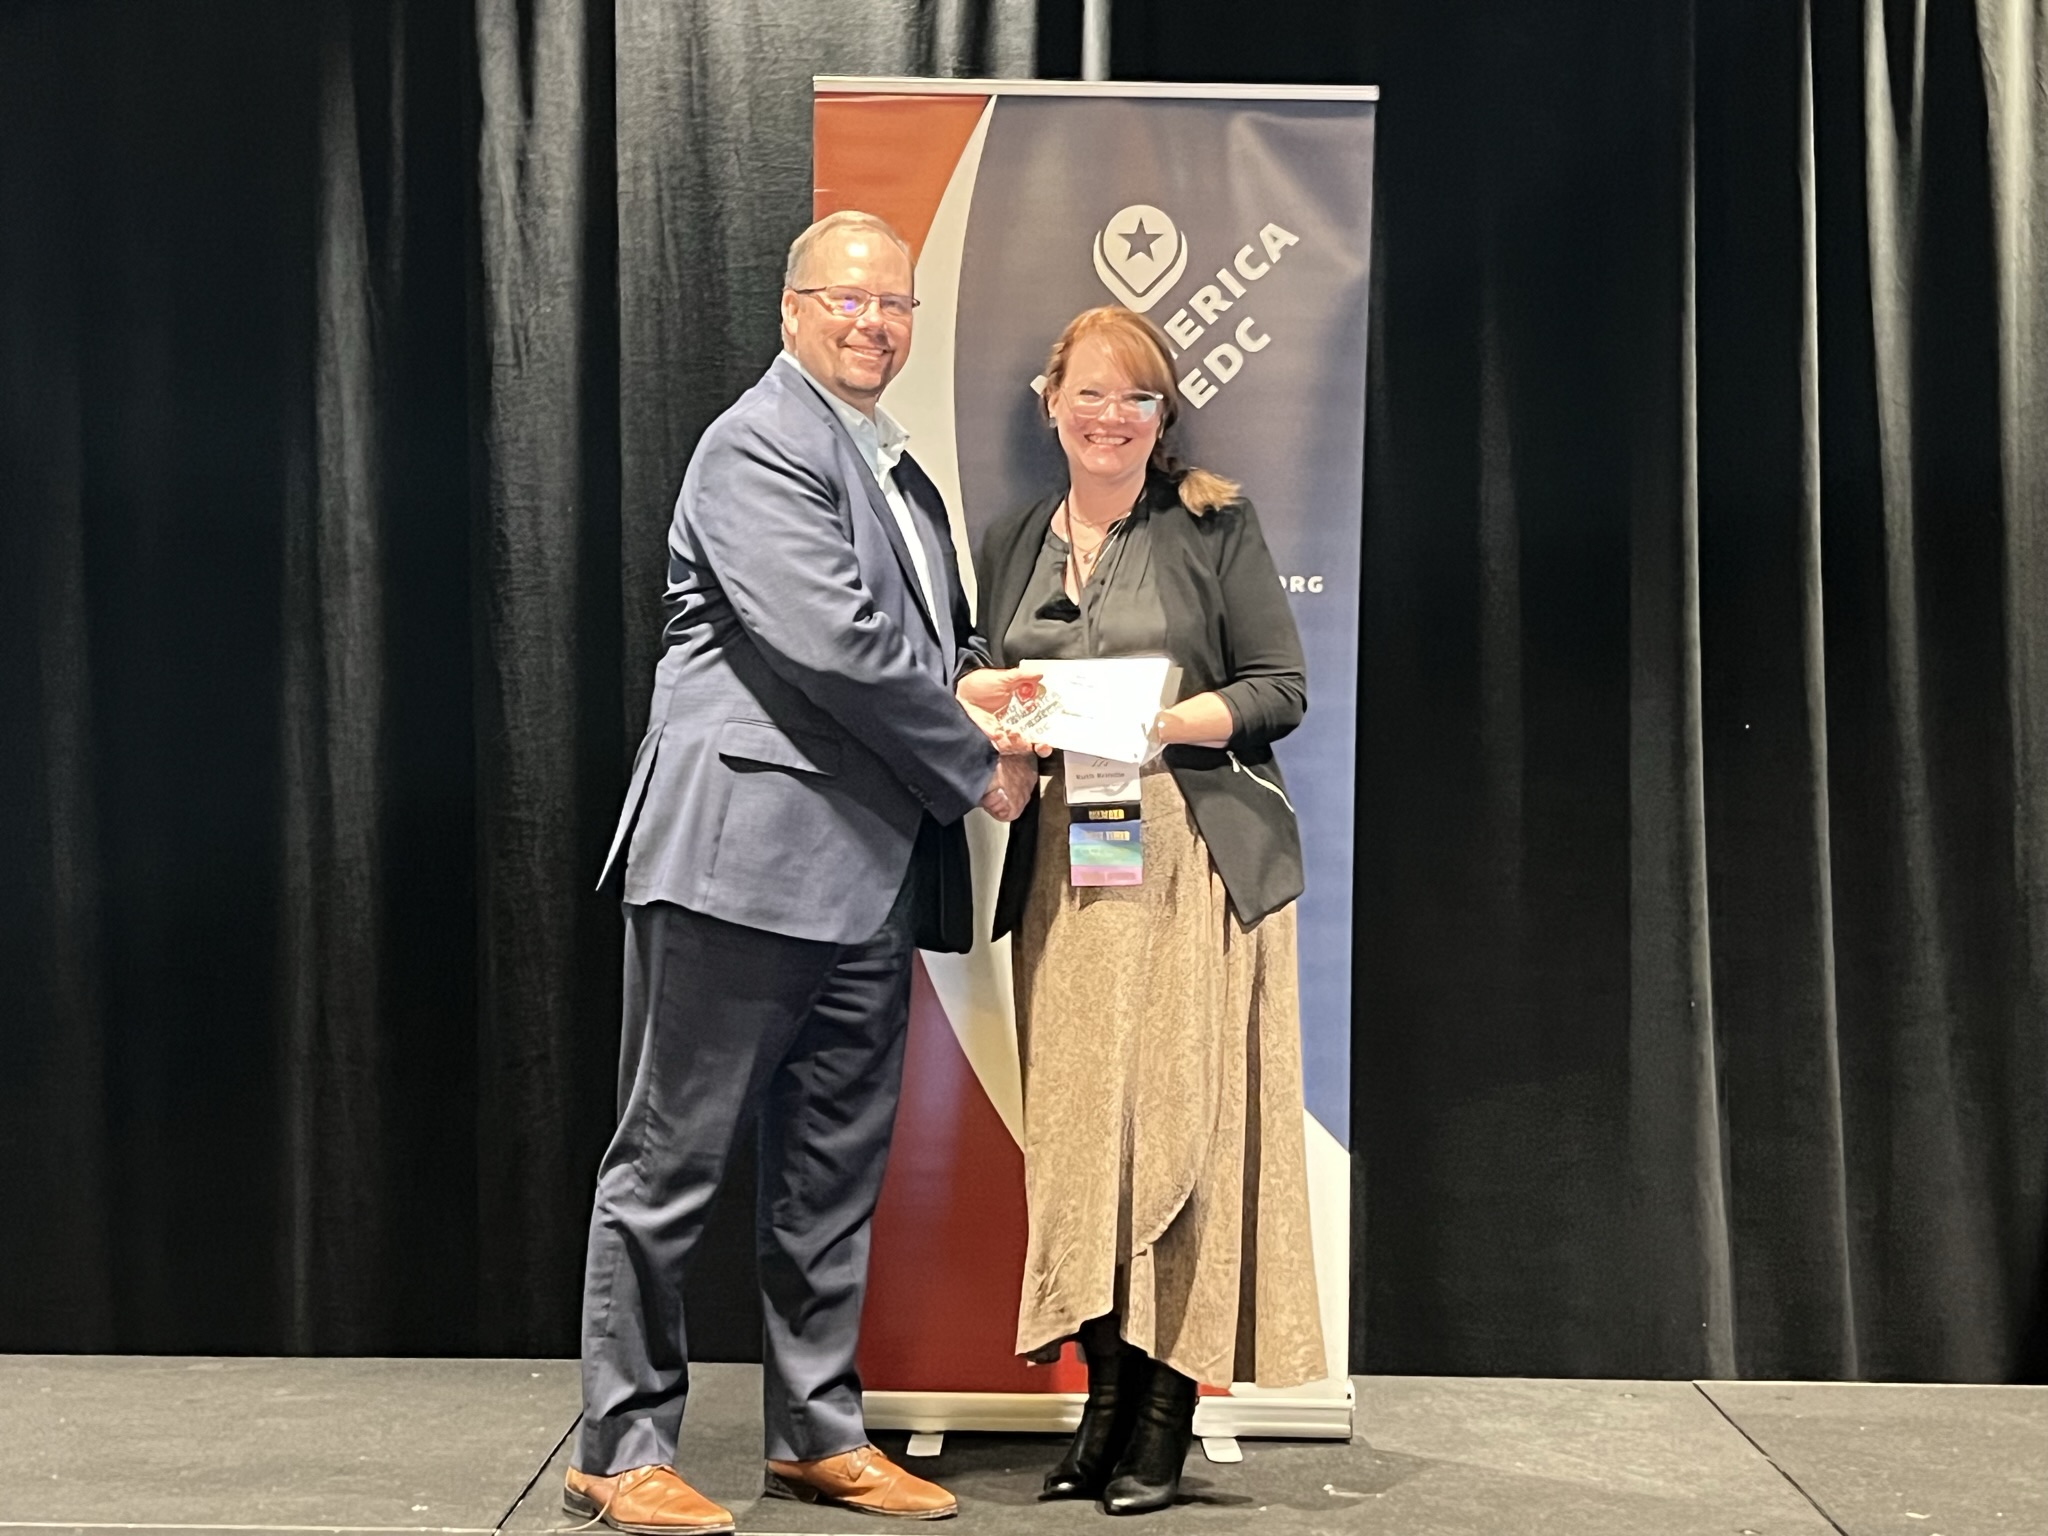 Click the Clinton County Workforce Collaborative Receives Economic Development Award from Mid-America Economic Development Council Slide Photo to Open